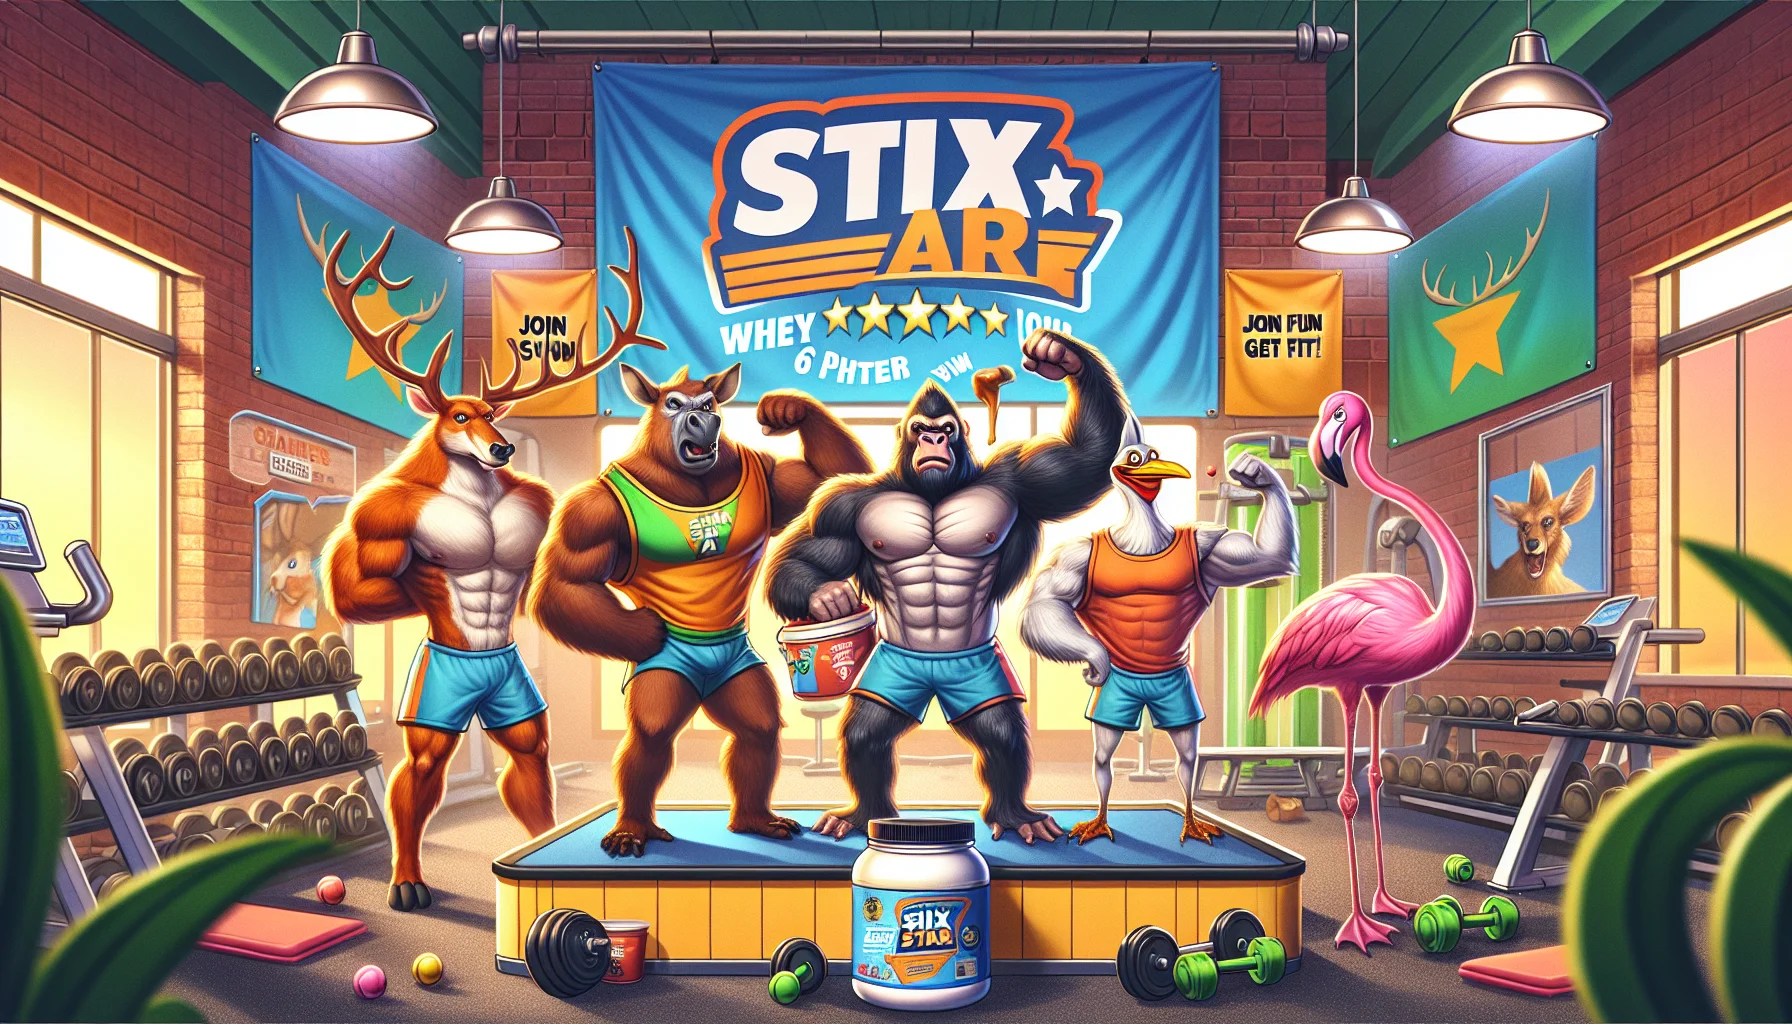 Create a funny and enticing image illustrating a review for a whey protein supplement called 'Six Star'. Picture this: a group of cartoon animals, such as a muscular kangaroo, a strong gorilla, and a fit flamingo, are conducting their own 'gym review show'. The scene is in a vibrant gym with colorful equipment. Each animal character wears sports attire and endorses the Six Star whey protein, each with a tub of the product on hand. They're depicted displaying their muscular physique, most likely a humorous nod to the effects of the supplement. The backdrop contains banners reading 'Six Star Whey Protein' and 'Join the fun, get fit'! Make sure the scene is light-hearted and full of humor.